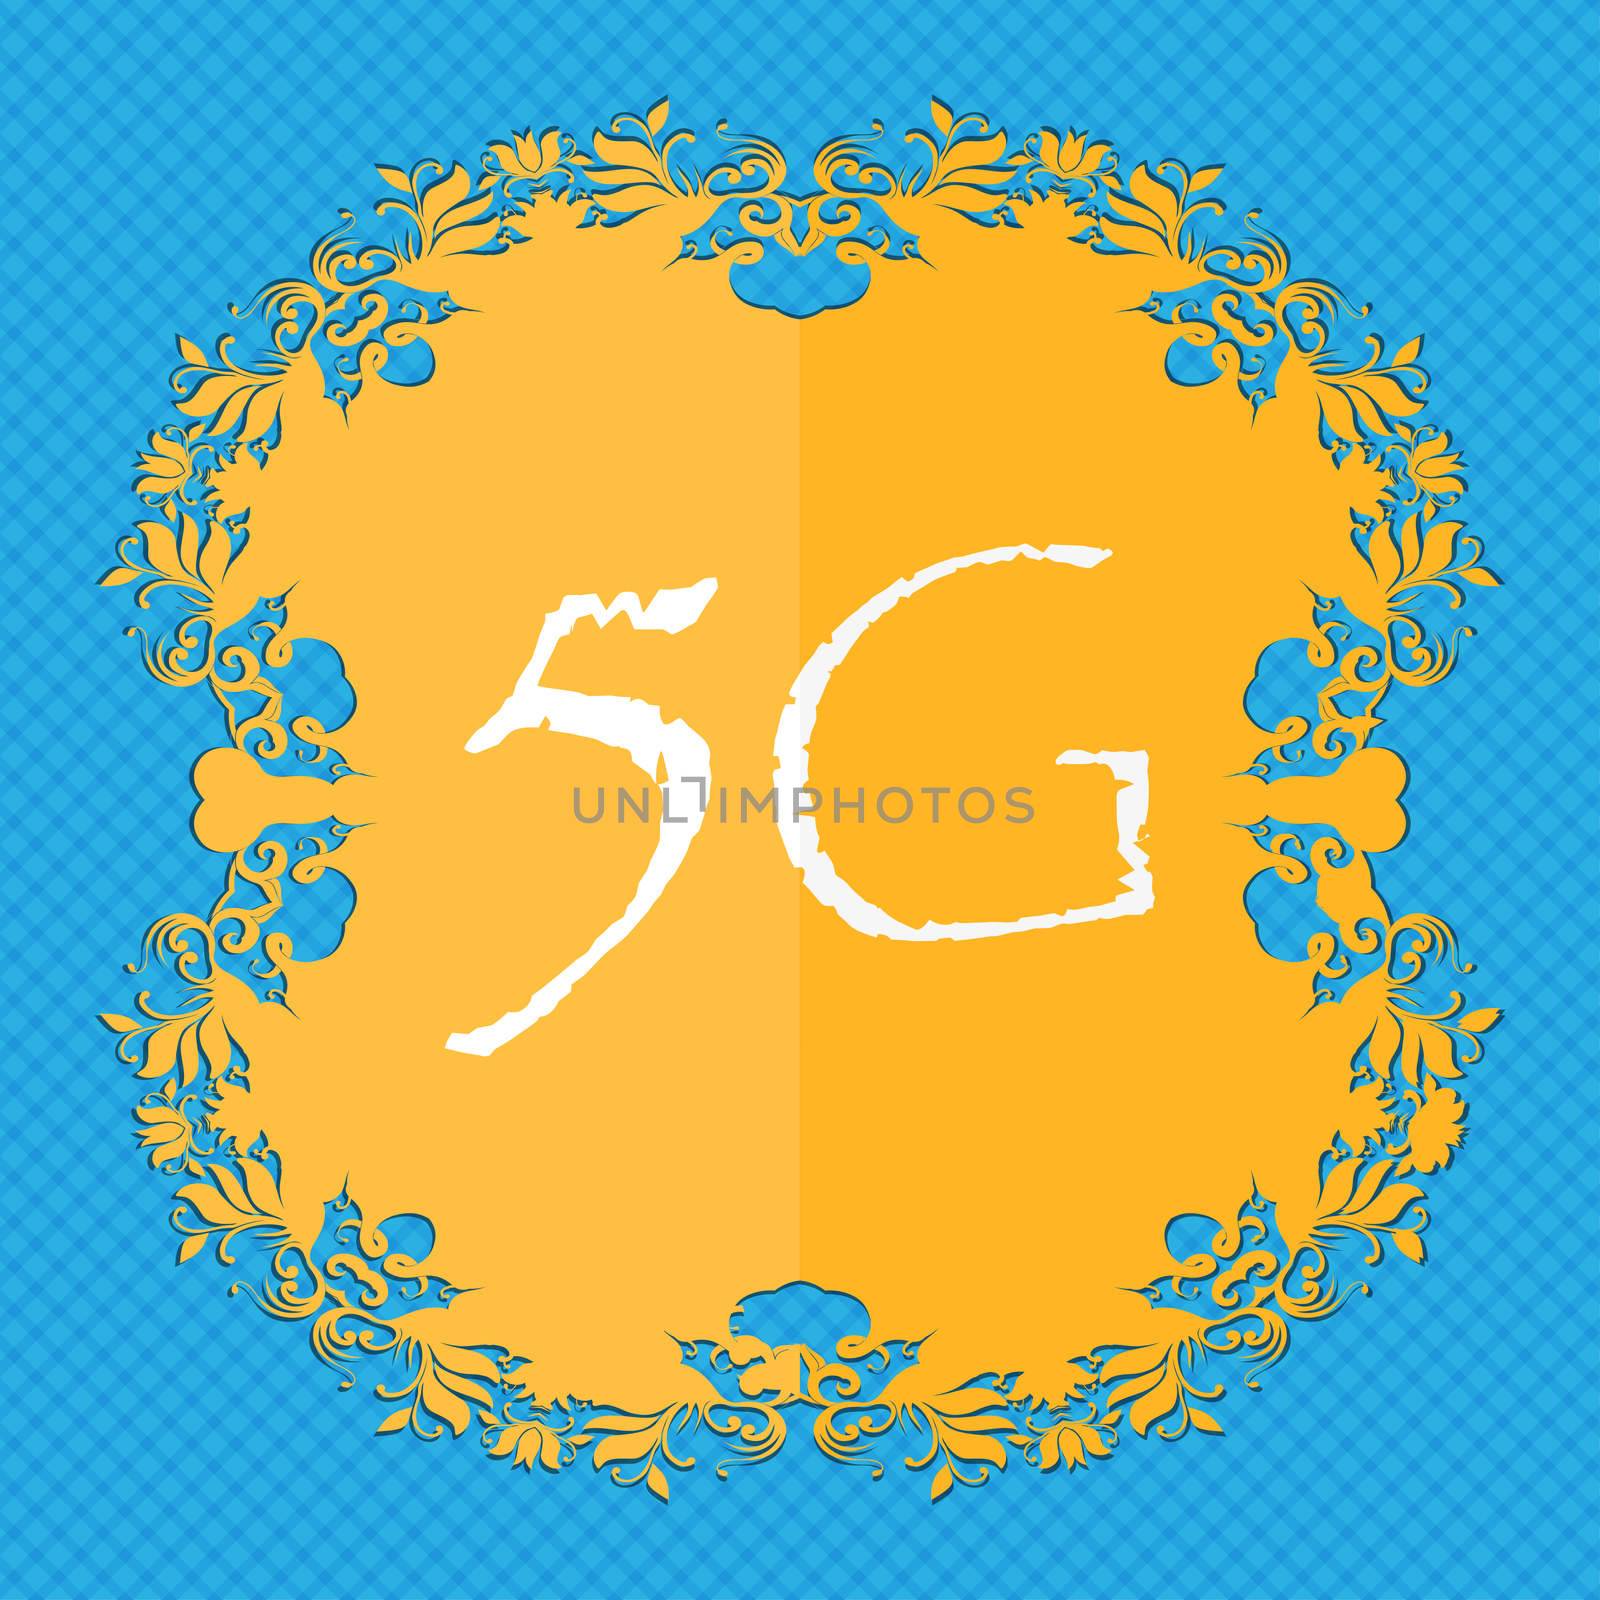 5G sign icon. Mobile telecommunications technology symbol. Floral flat design on a blue abstract background with place for your text.  by serhii_lohvyniuk